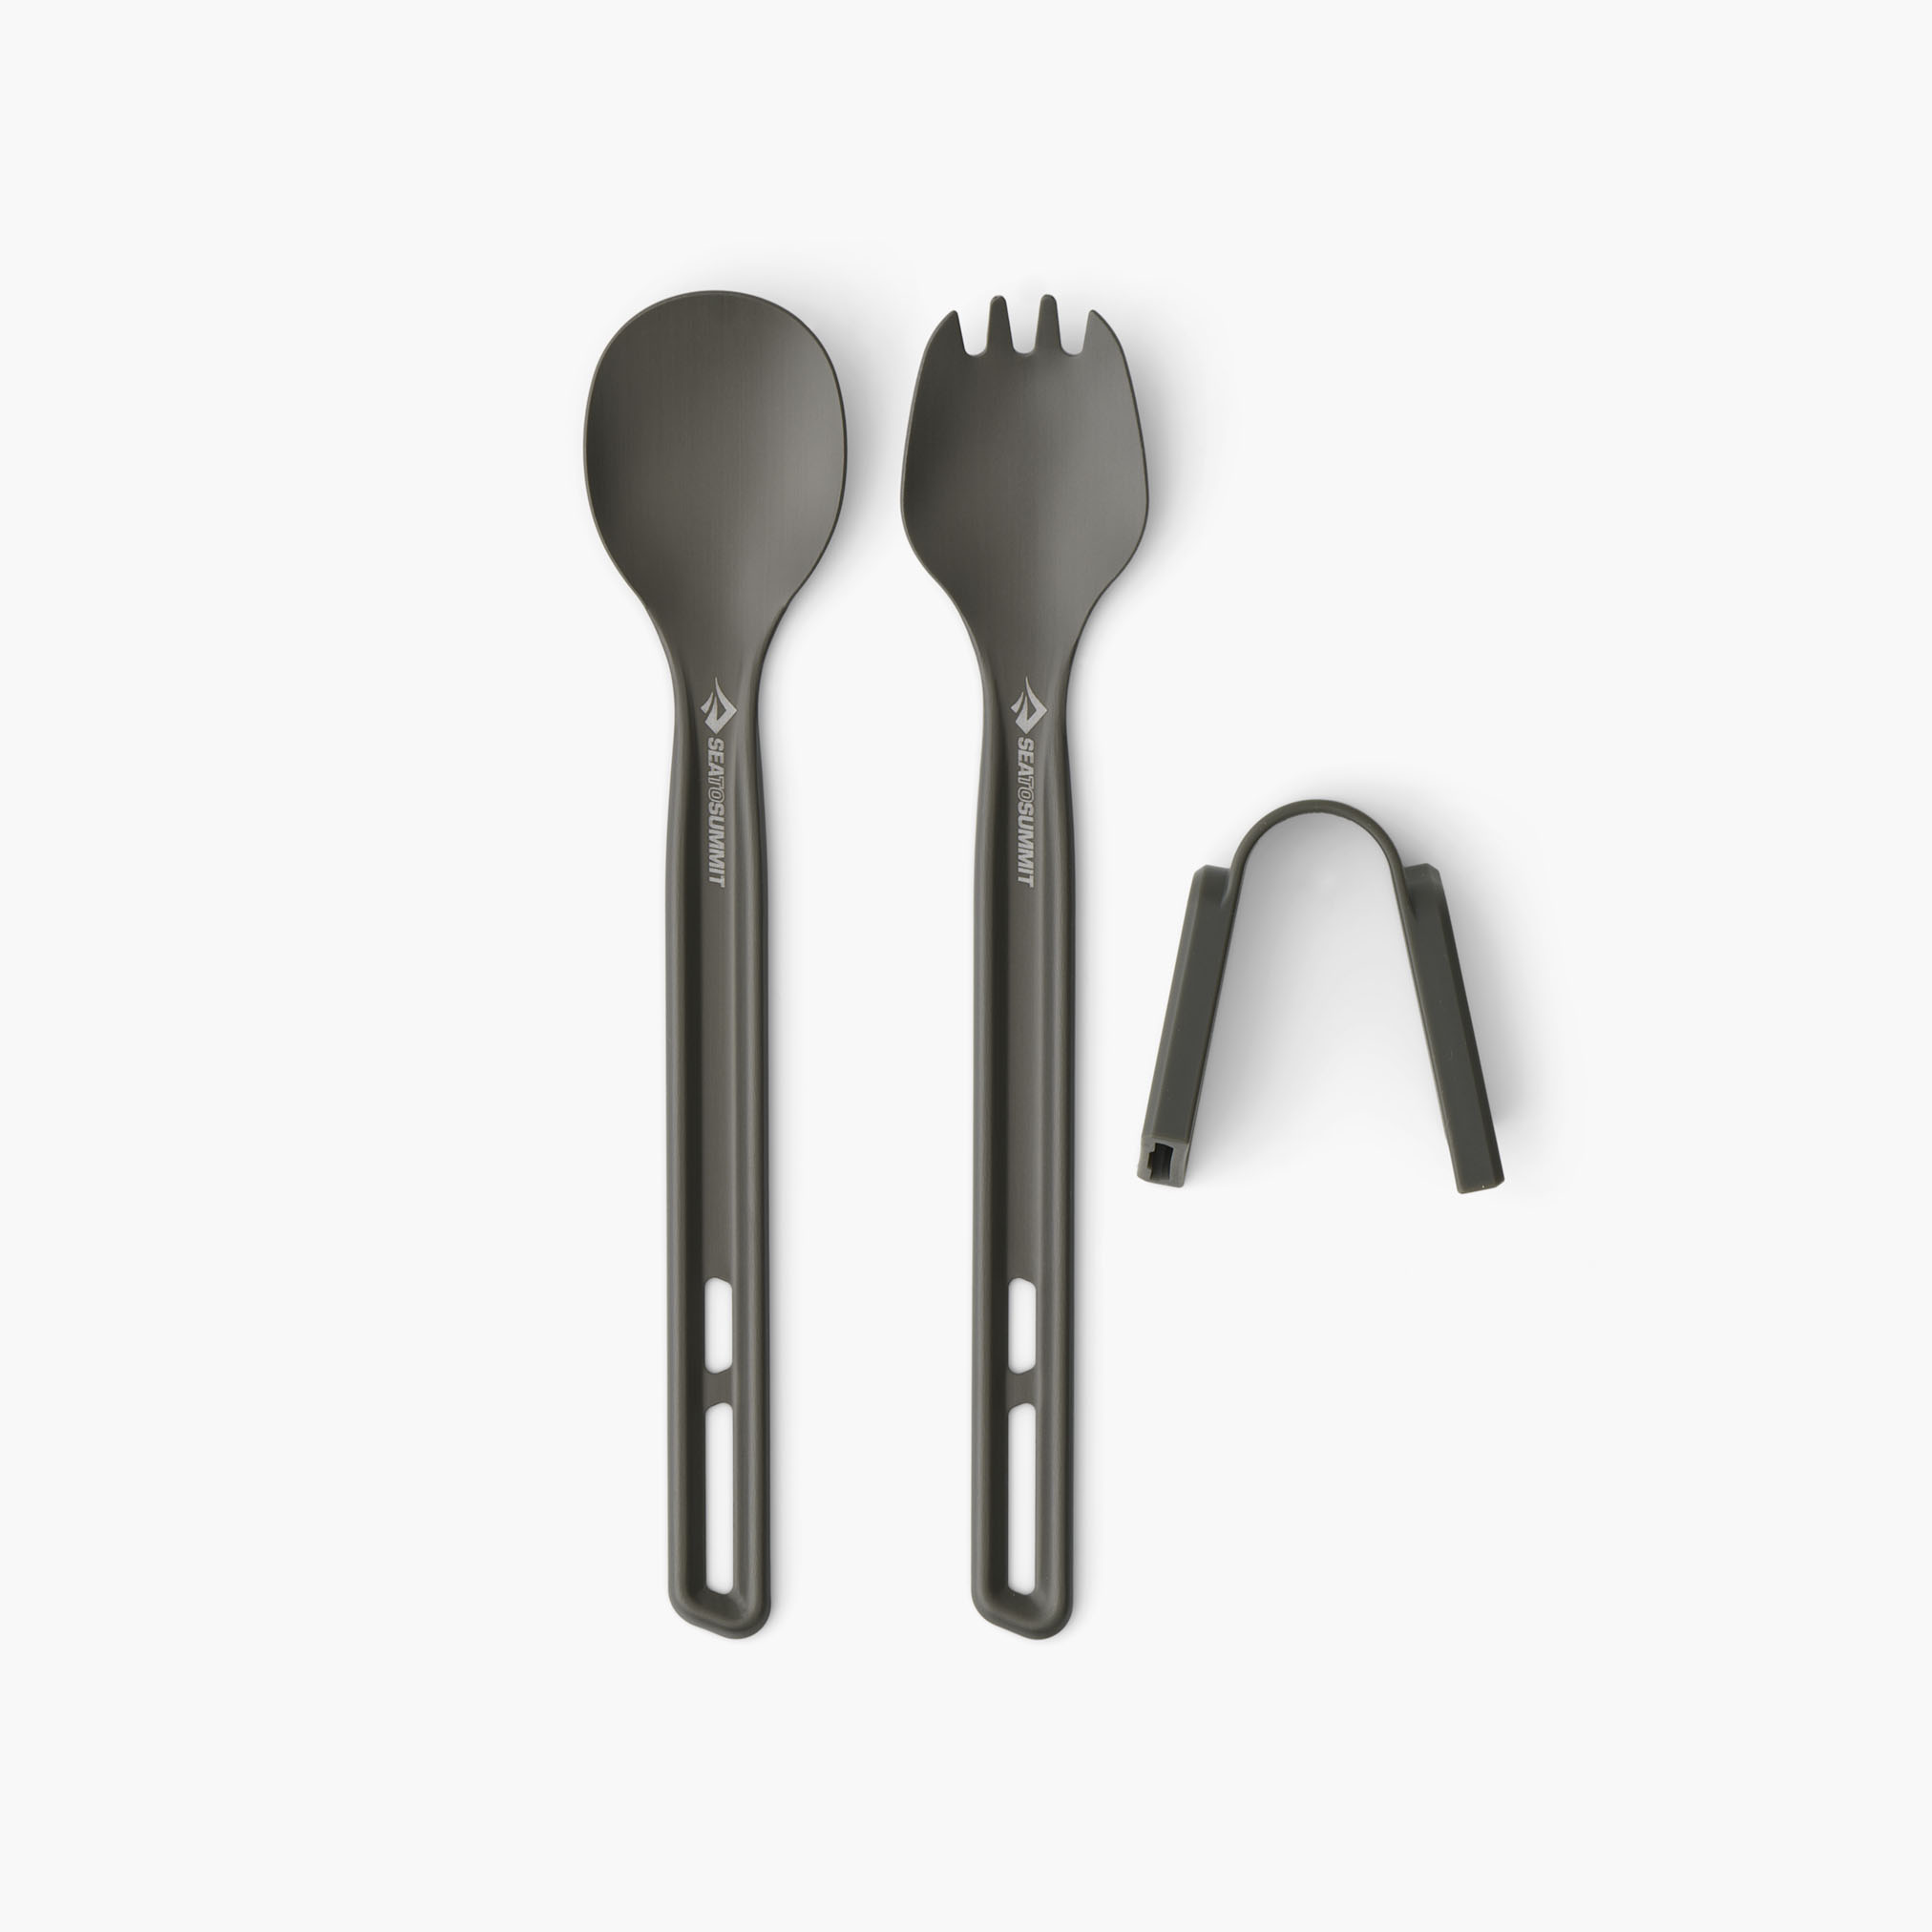 Příbor Sea to Summit Frontier UL Cutlery Set - 2 kusy Long Handle Spoon and Spork velikost: OS (UNI)